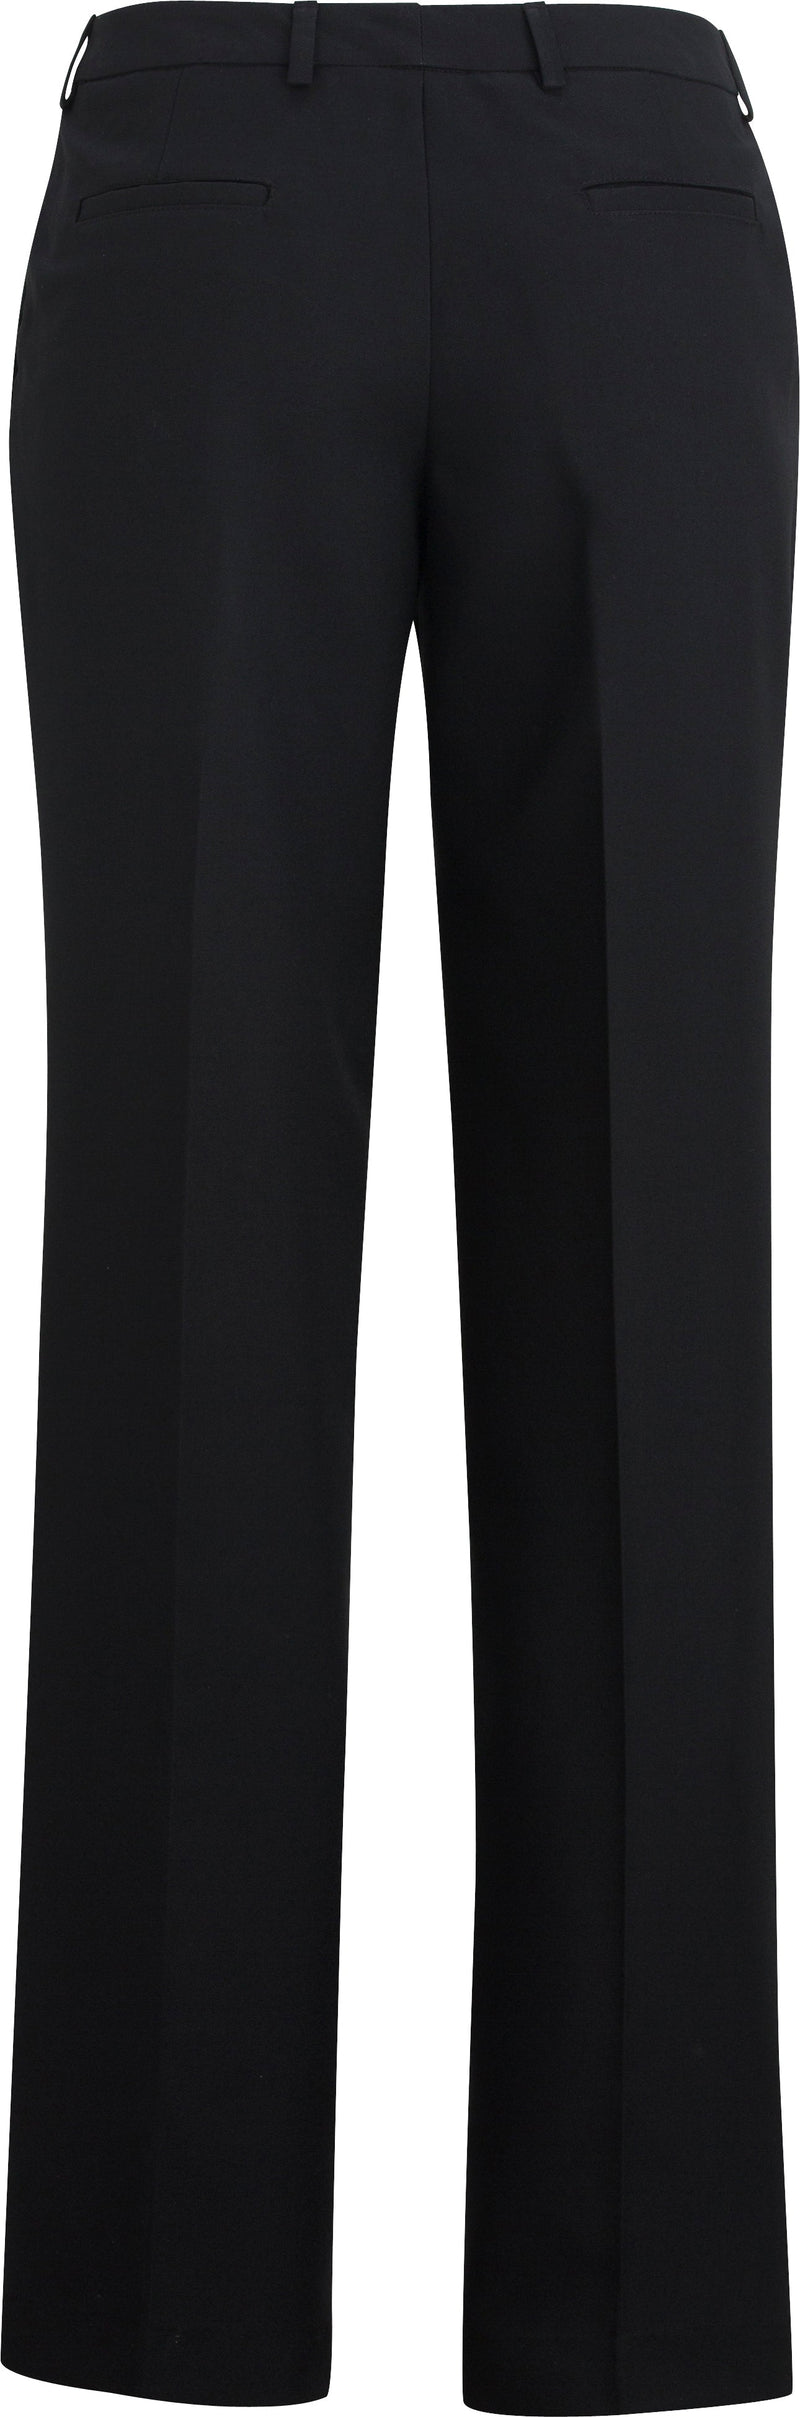 Edwards Garment [8526] Ladies Lightweight Washable Comfort Stretch Dress Pants.  Redwood & Ross Synergy Collection.  Live Chat For Bulk Discounts.